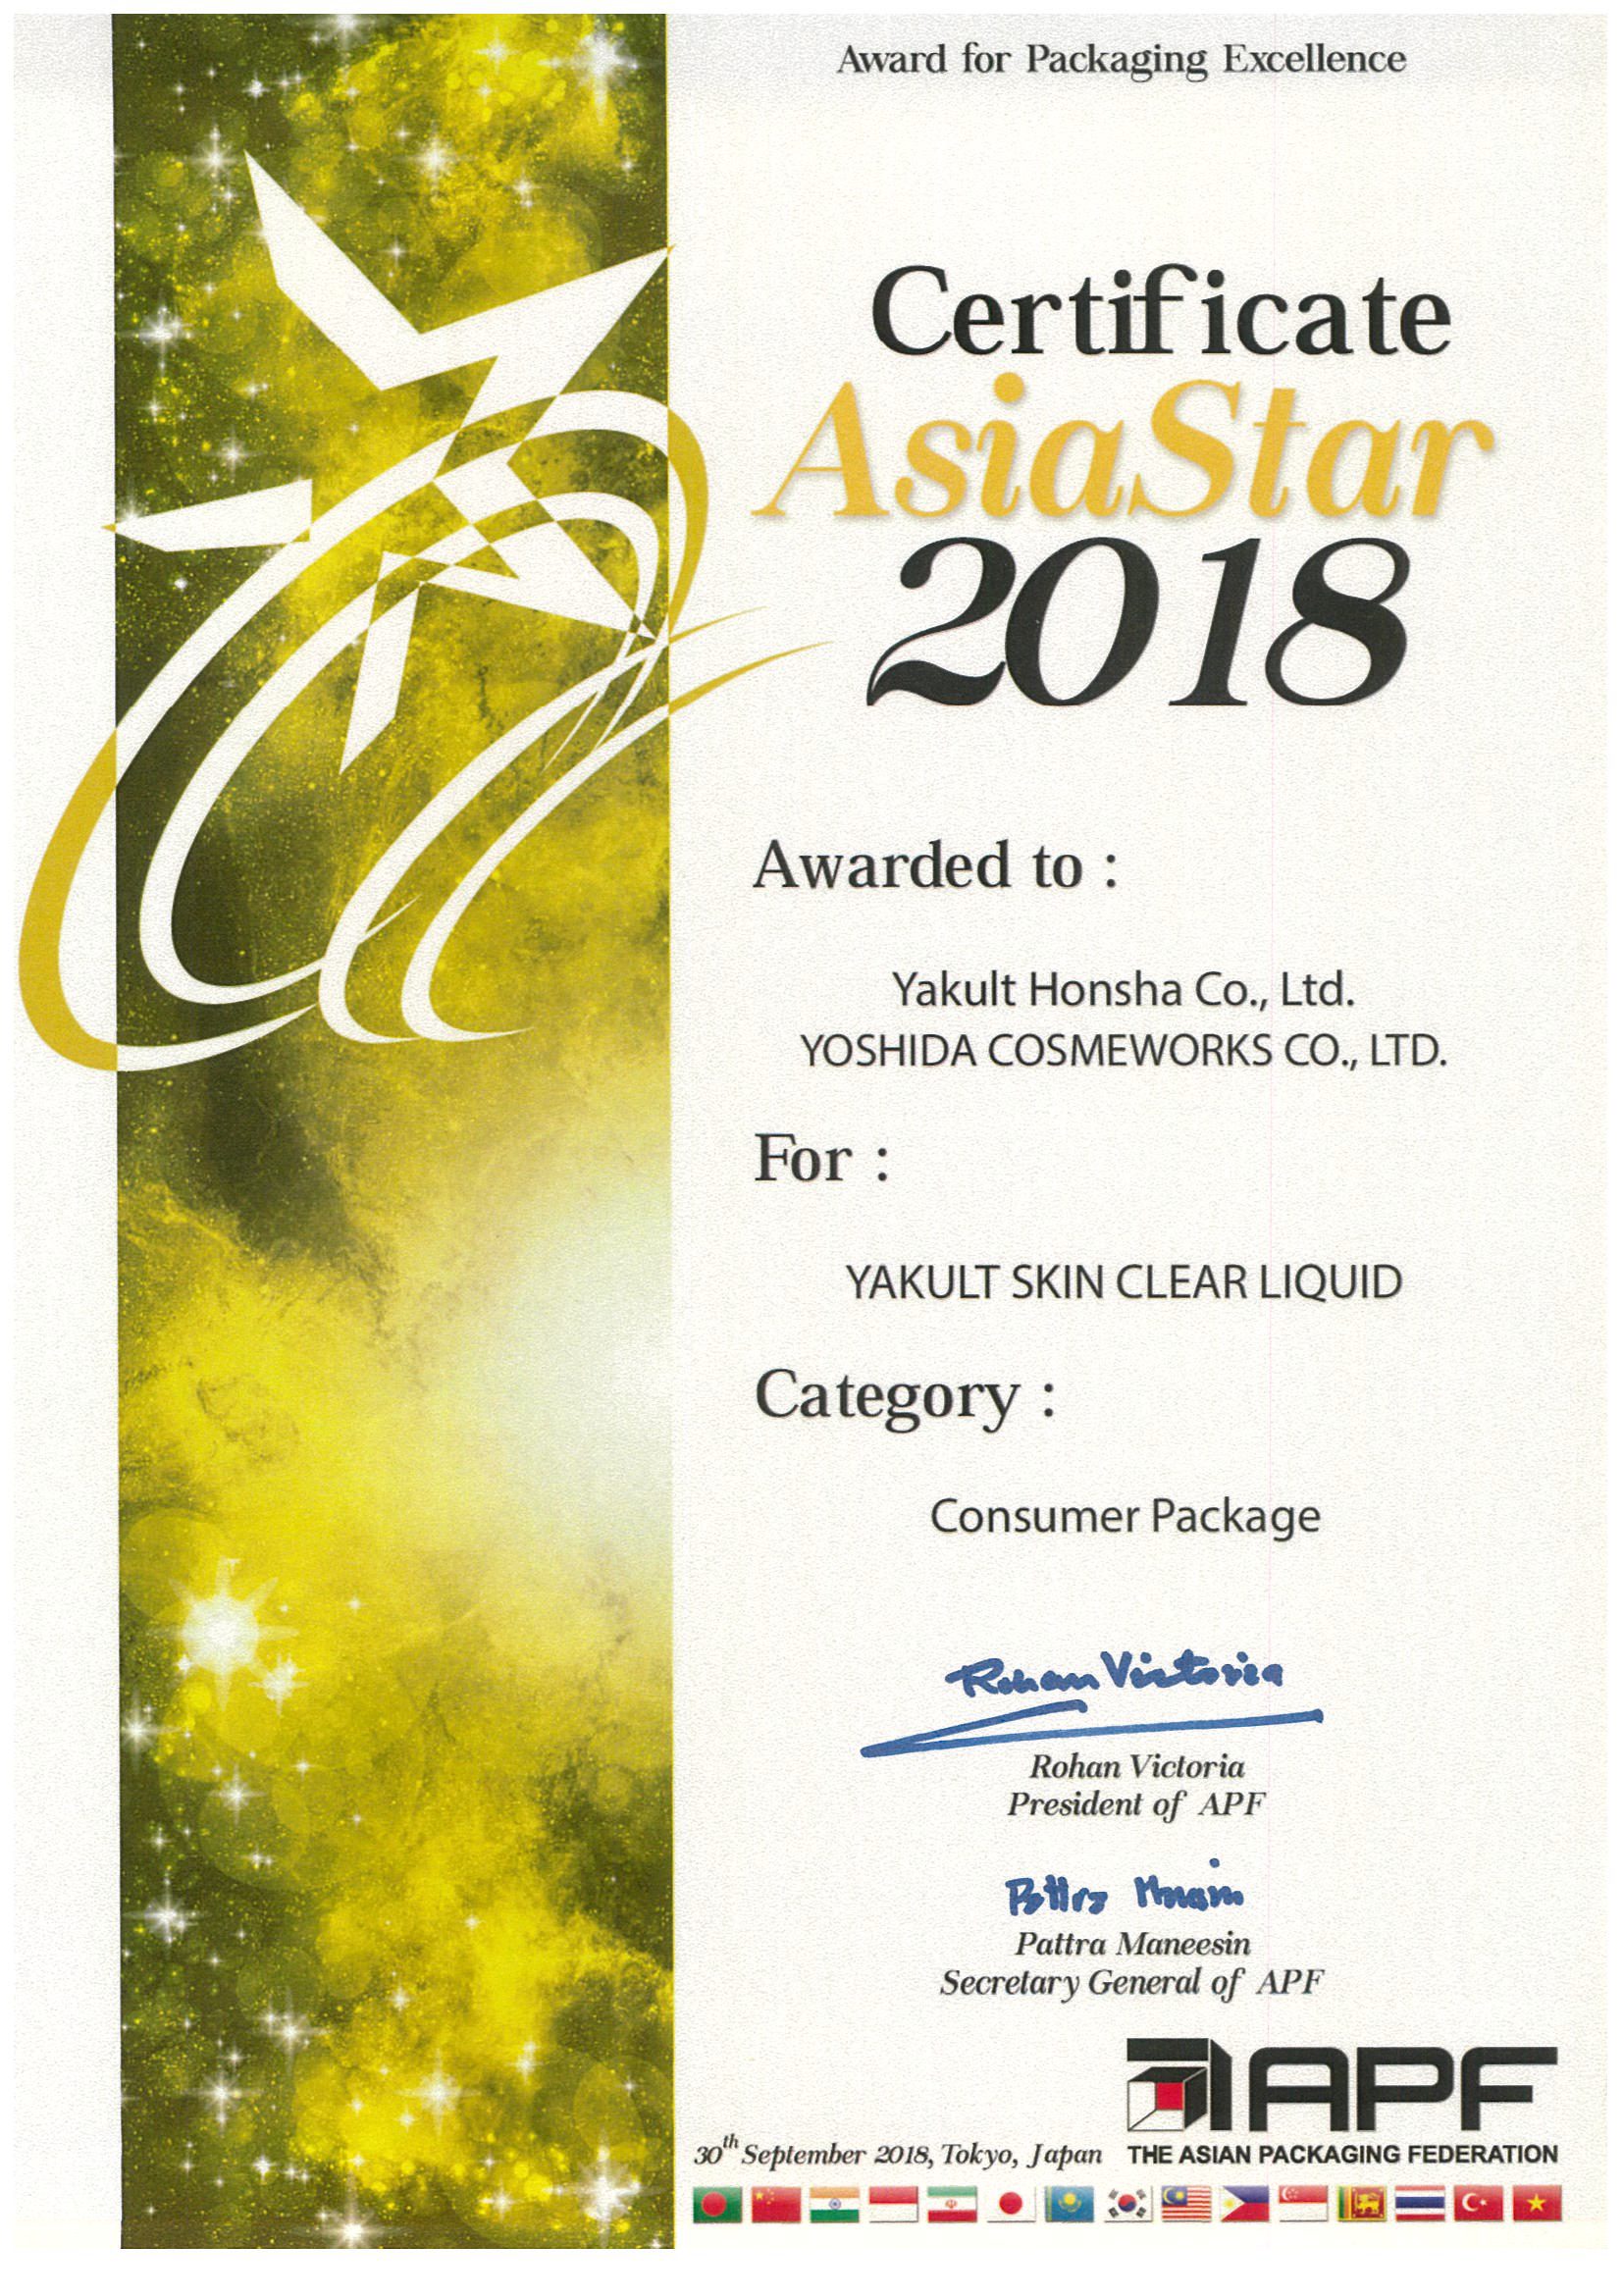 Asia Star 2018 Award for Consumer Package